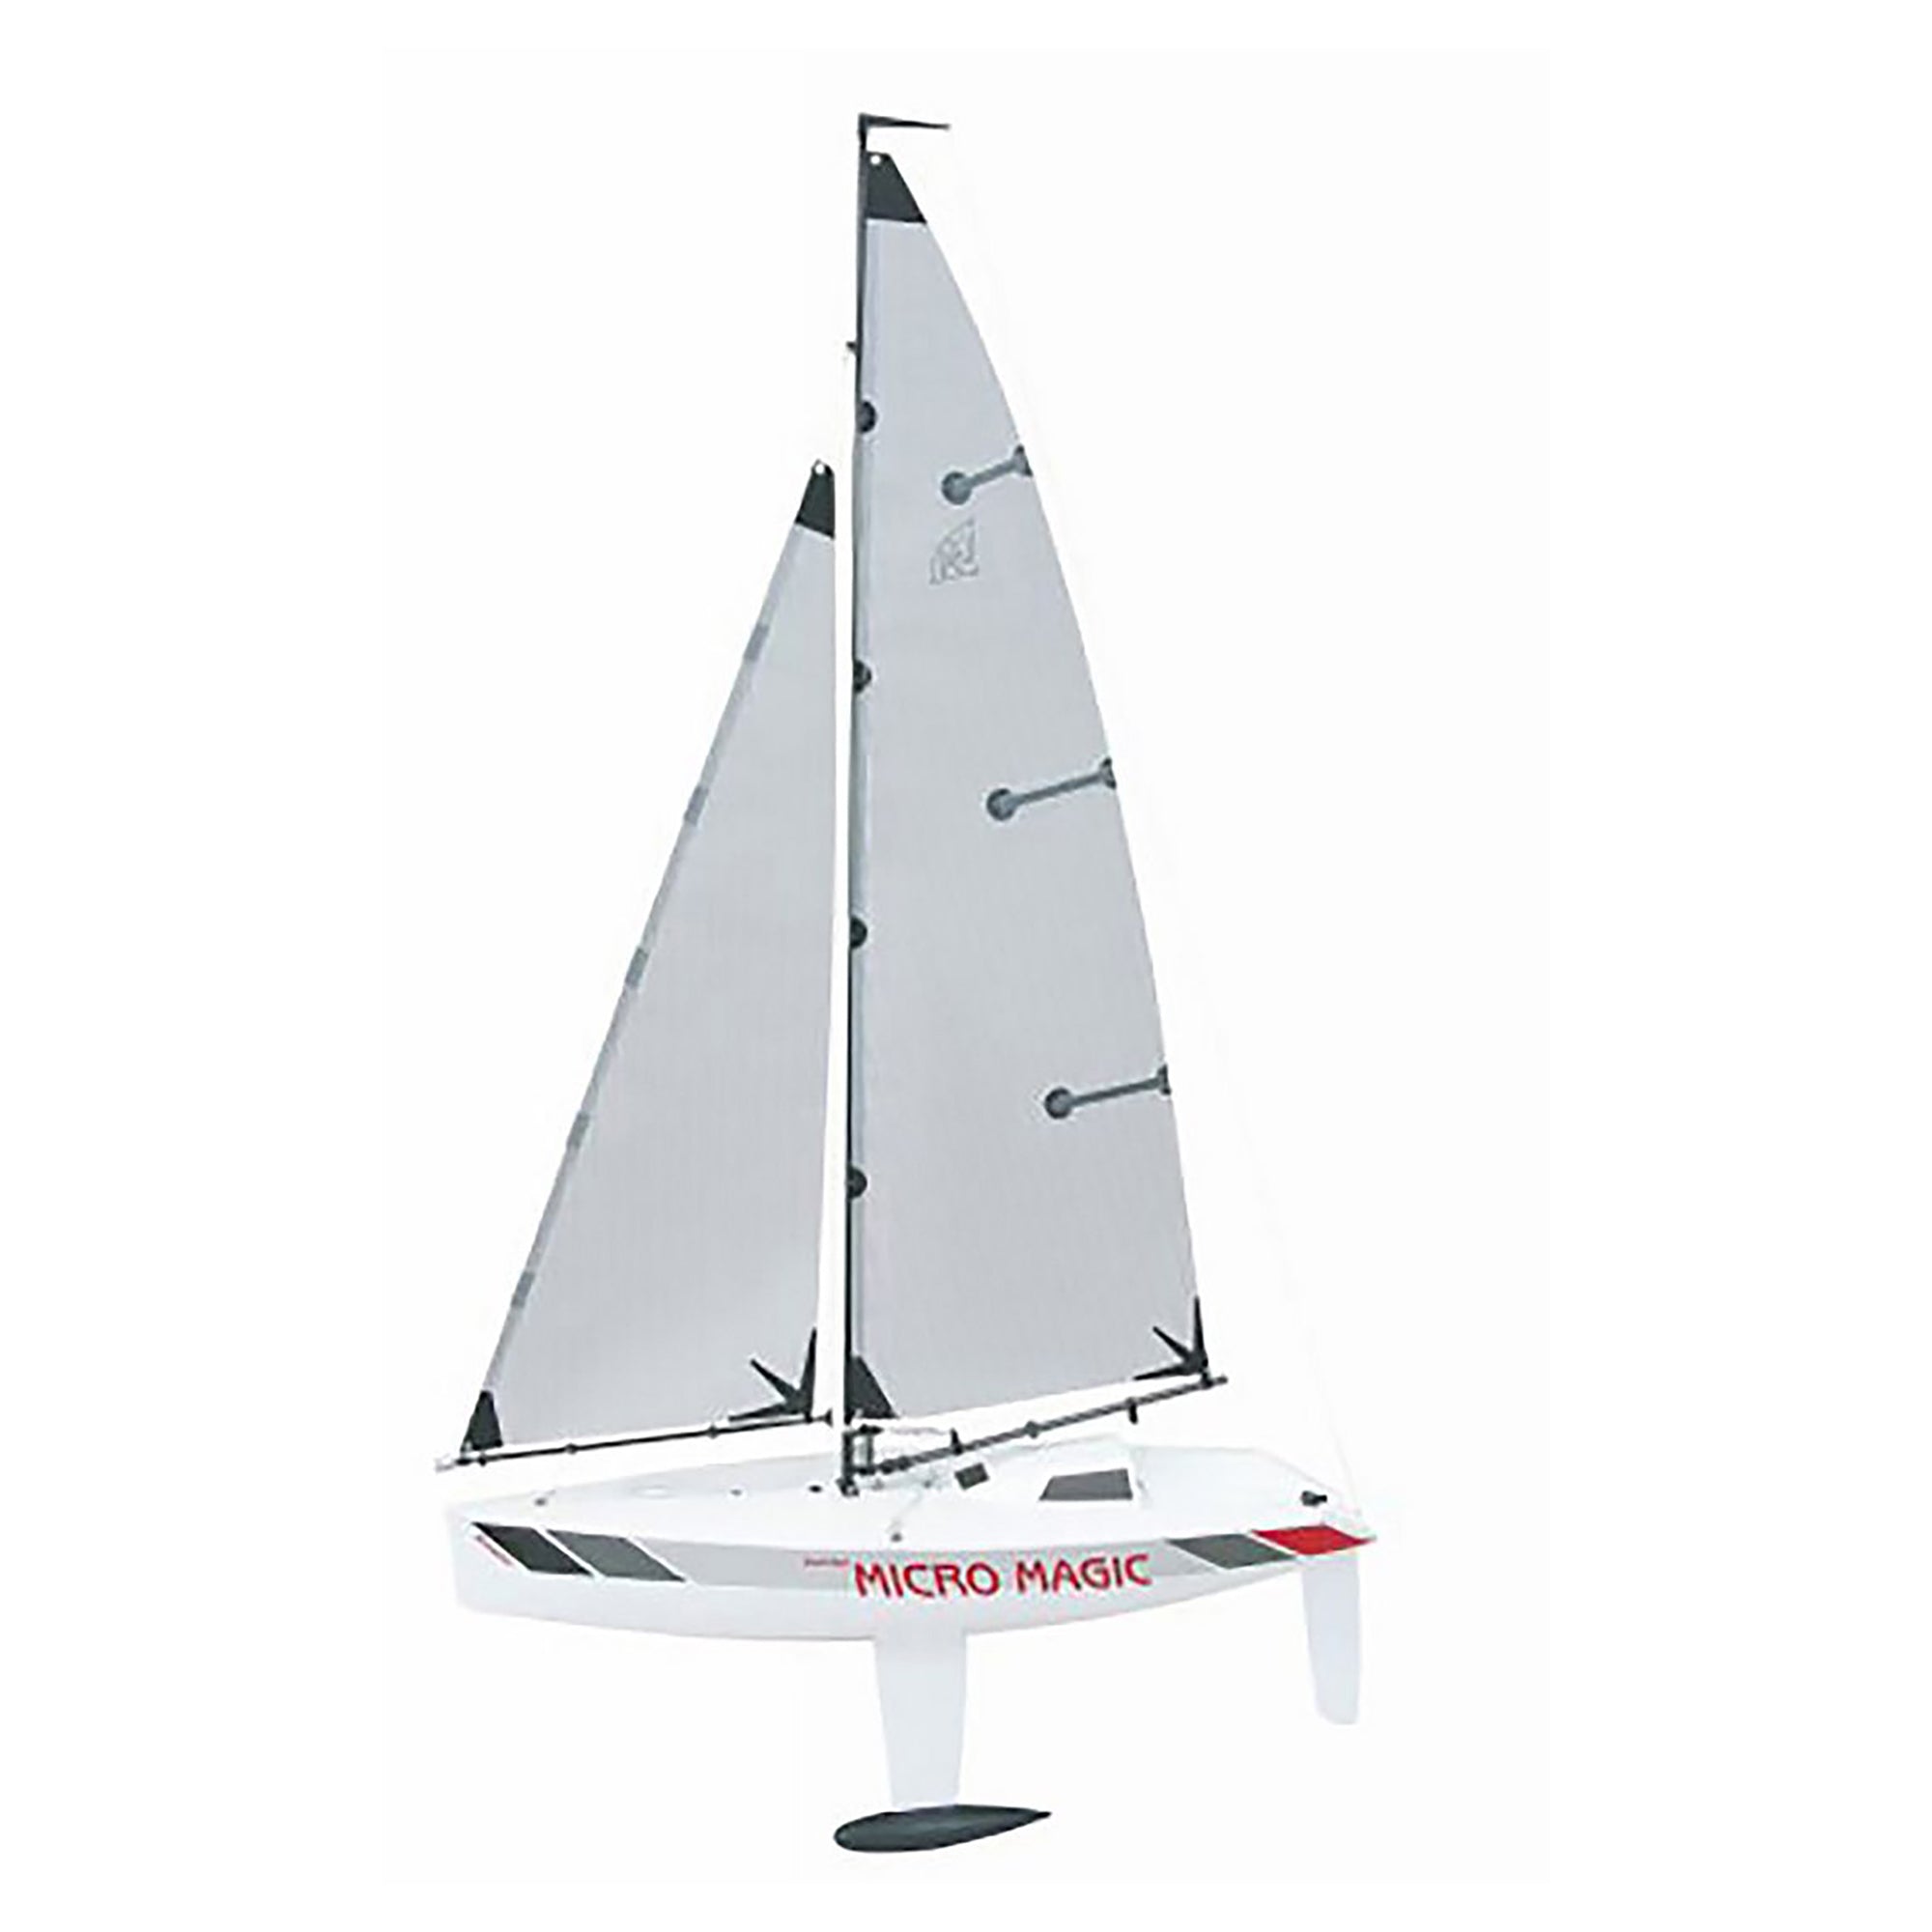 Graupner Micro Magic WP Racing (2014.V2) RC Yacht Kit (without Servos, Transmitter or Receiver), White